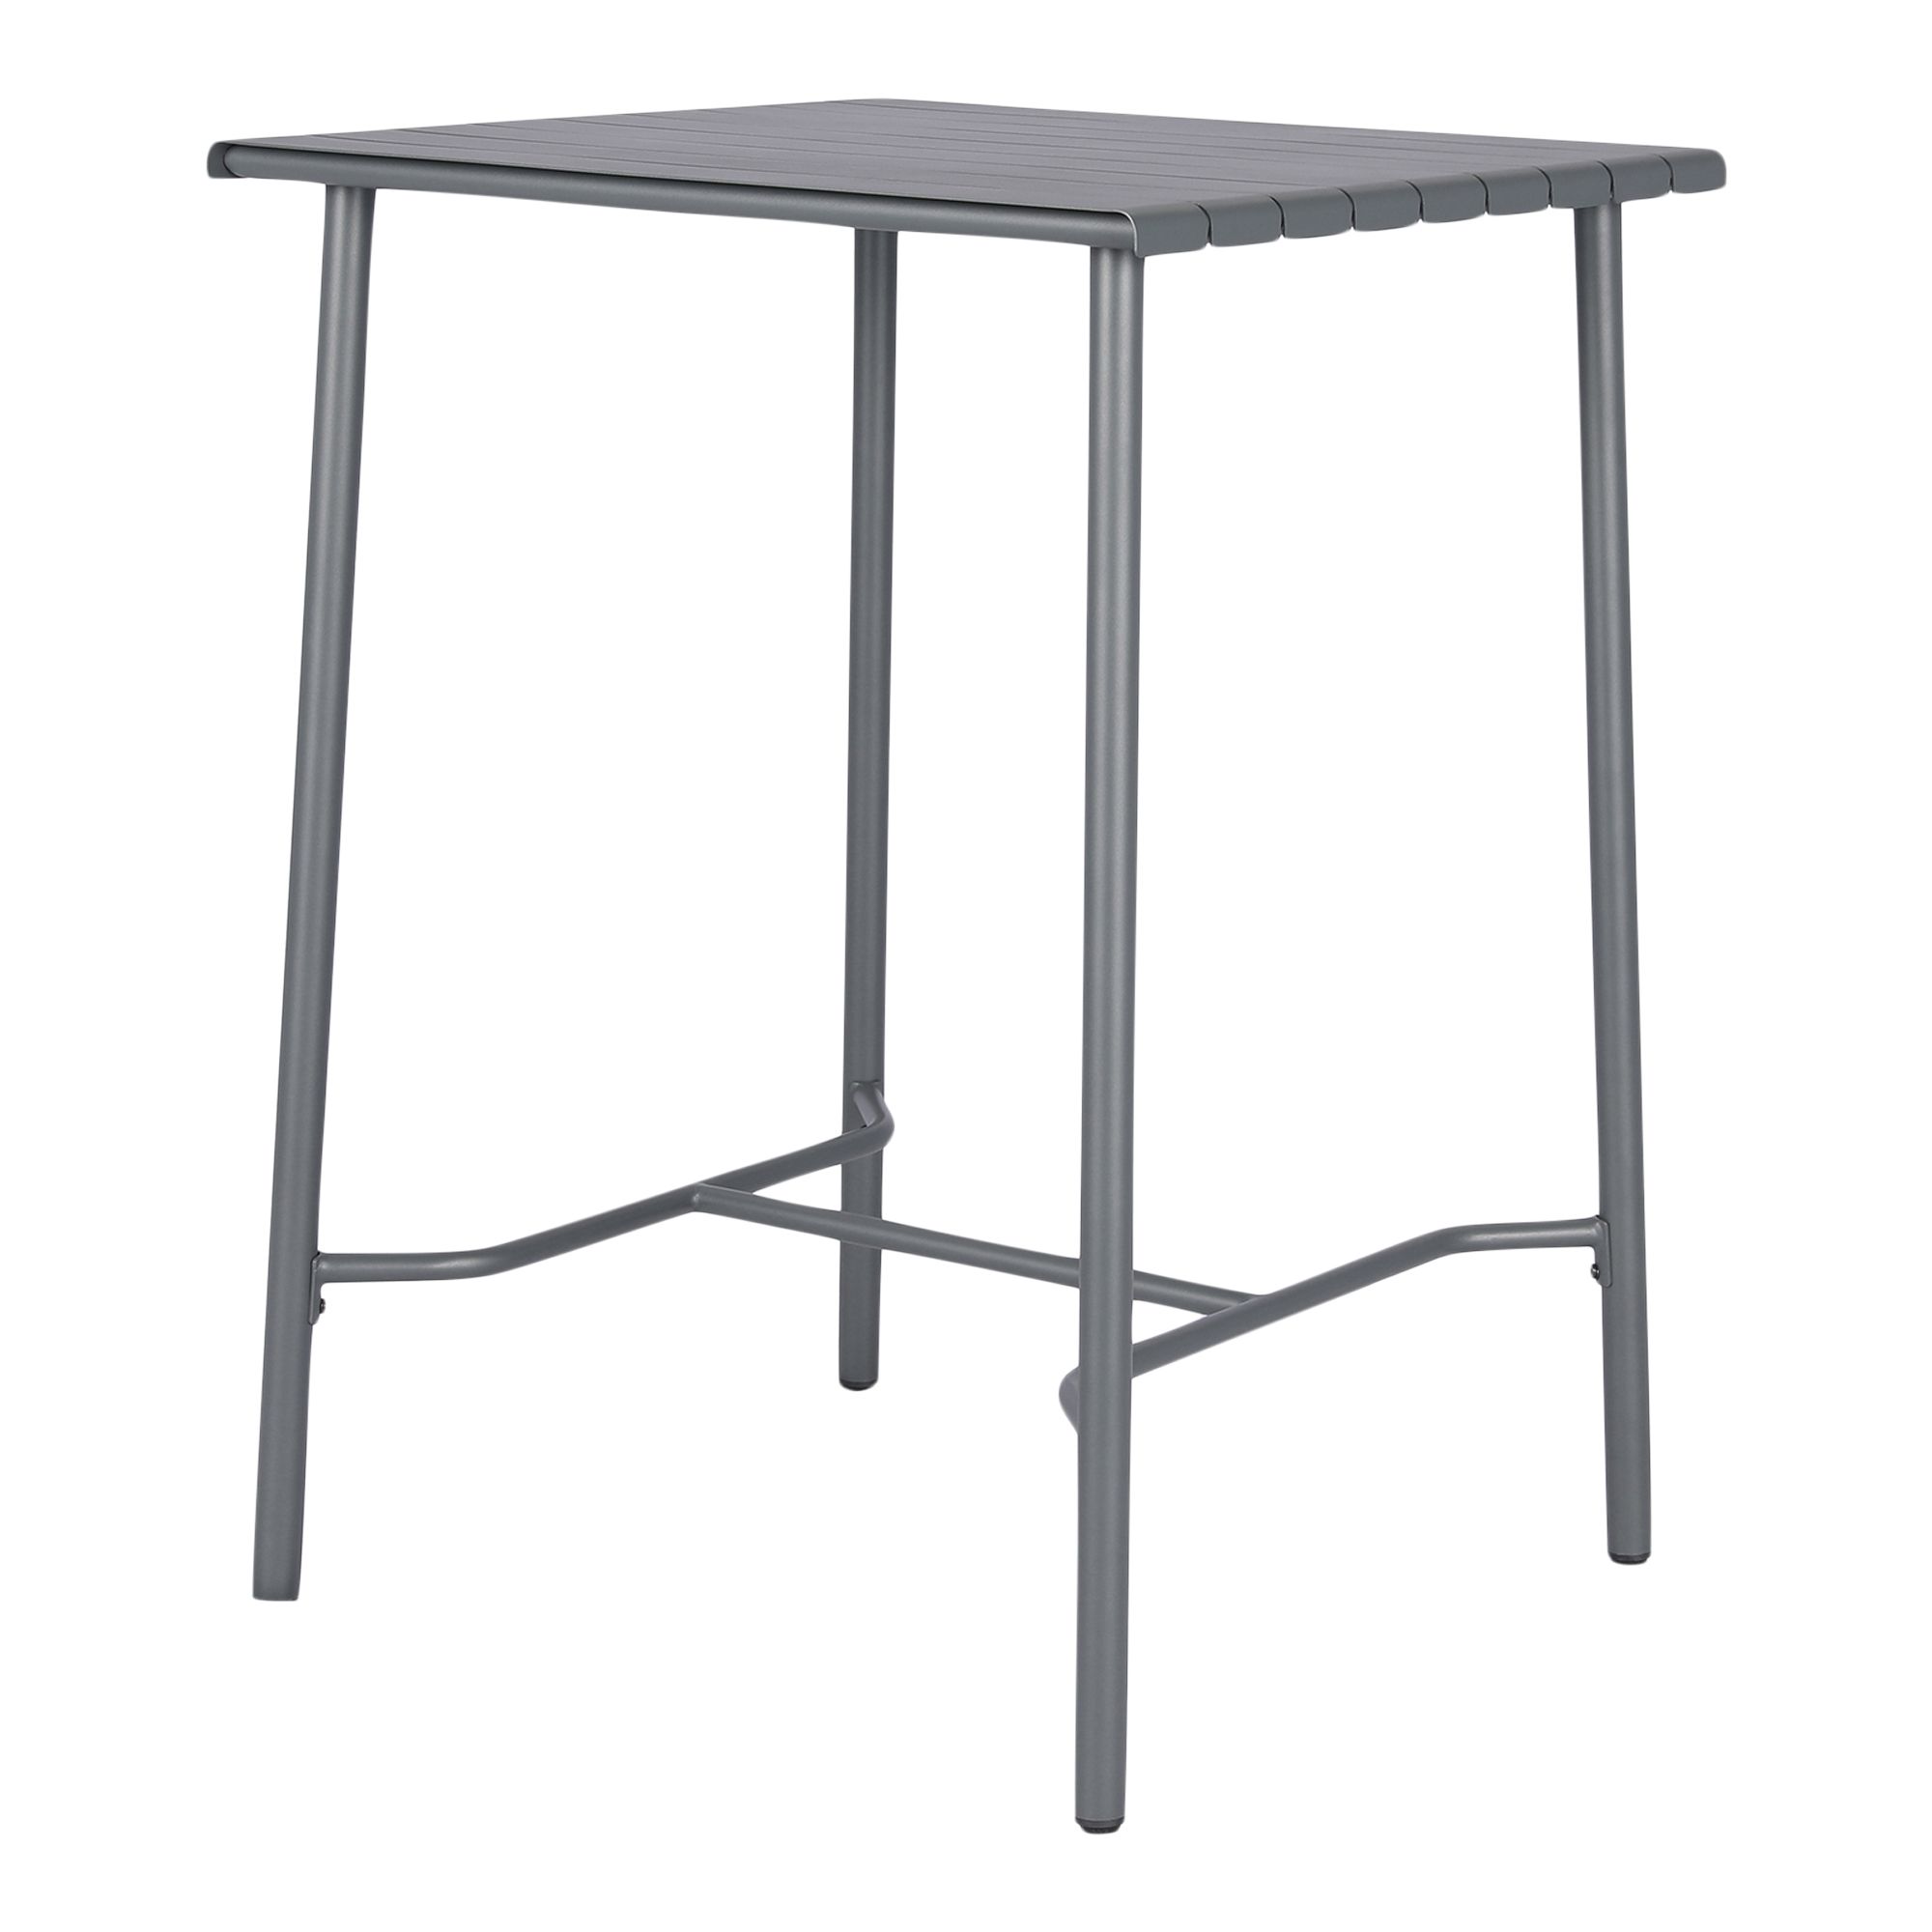 GoodHome Lithari Grey Metal 2 seater Square Cocktail table